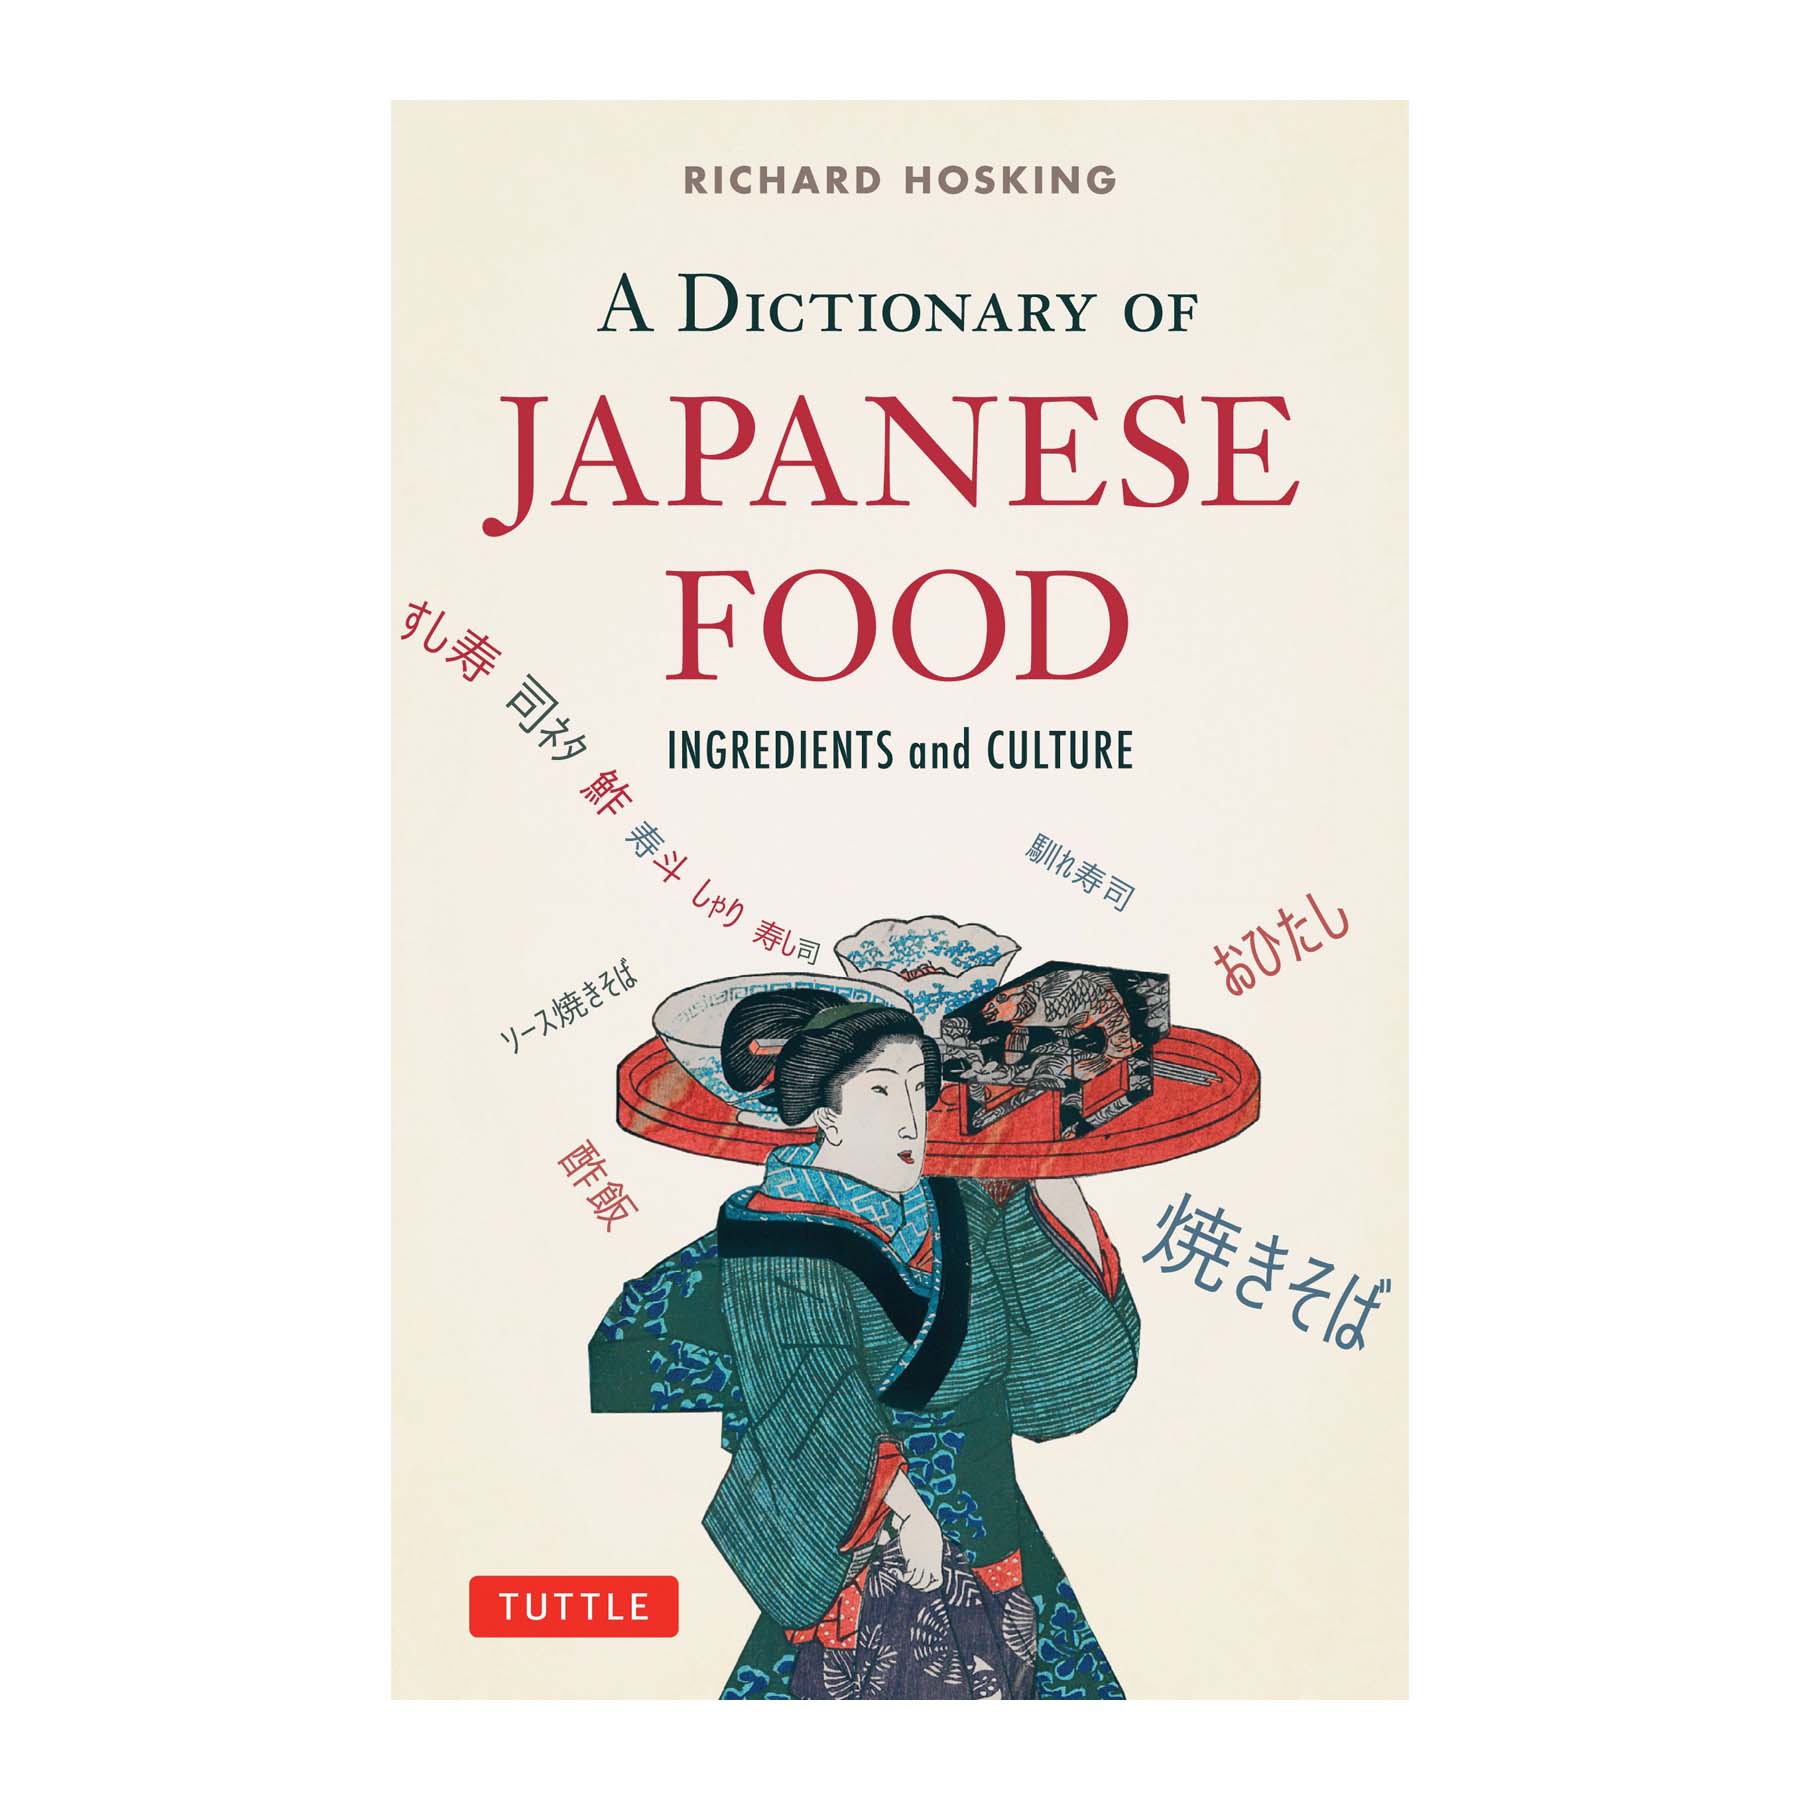 A Dictionary of Japanese Food: Ingredients and Culture